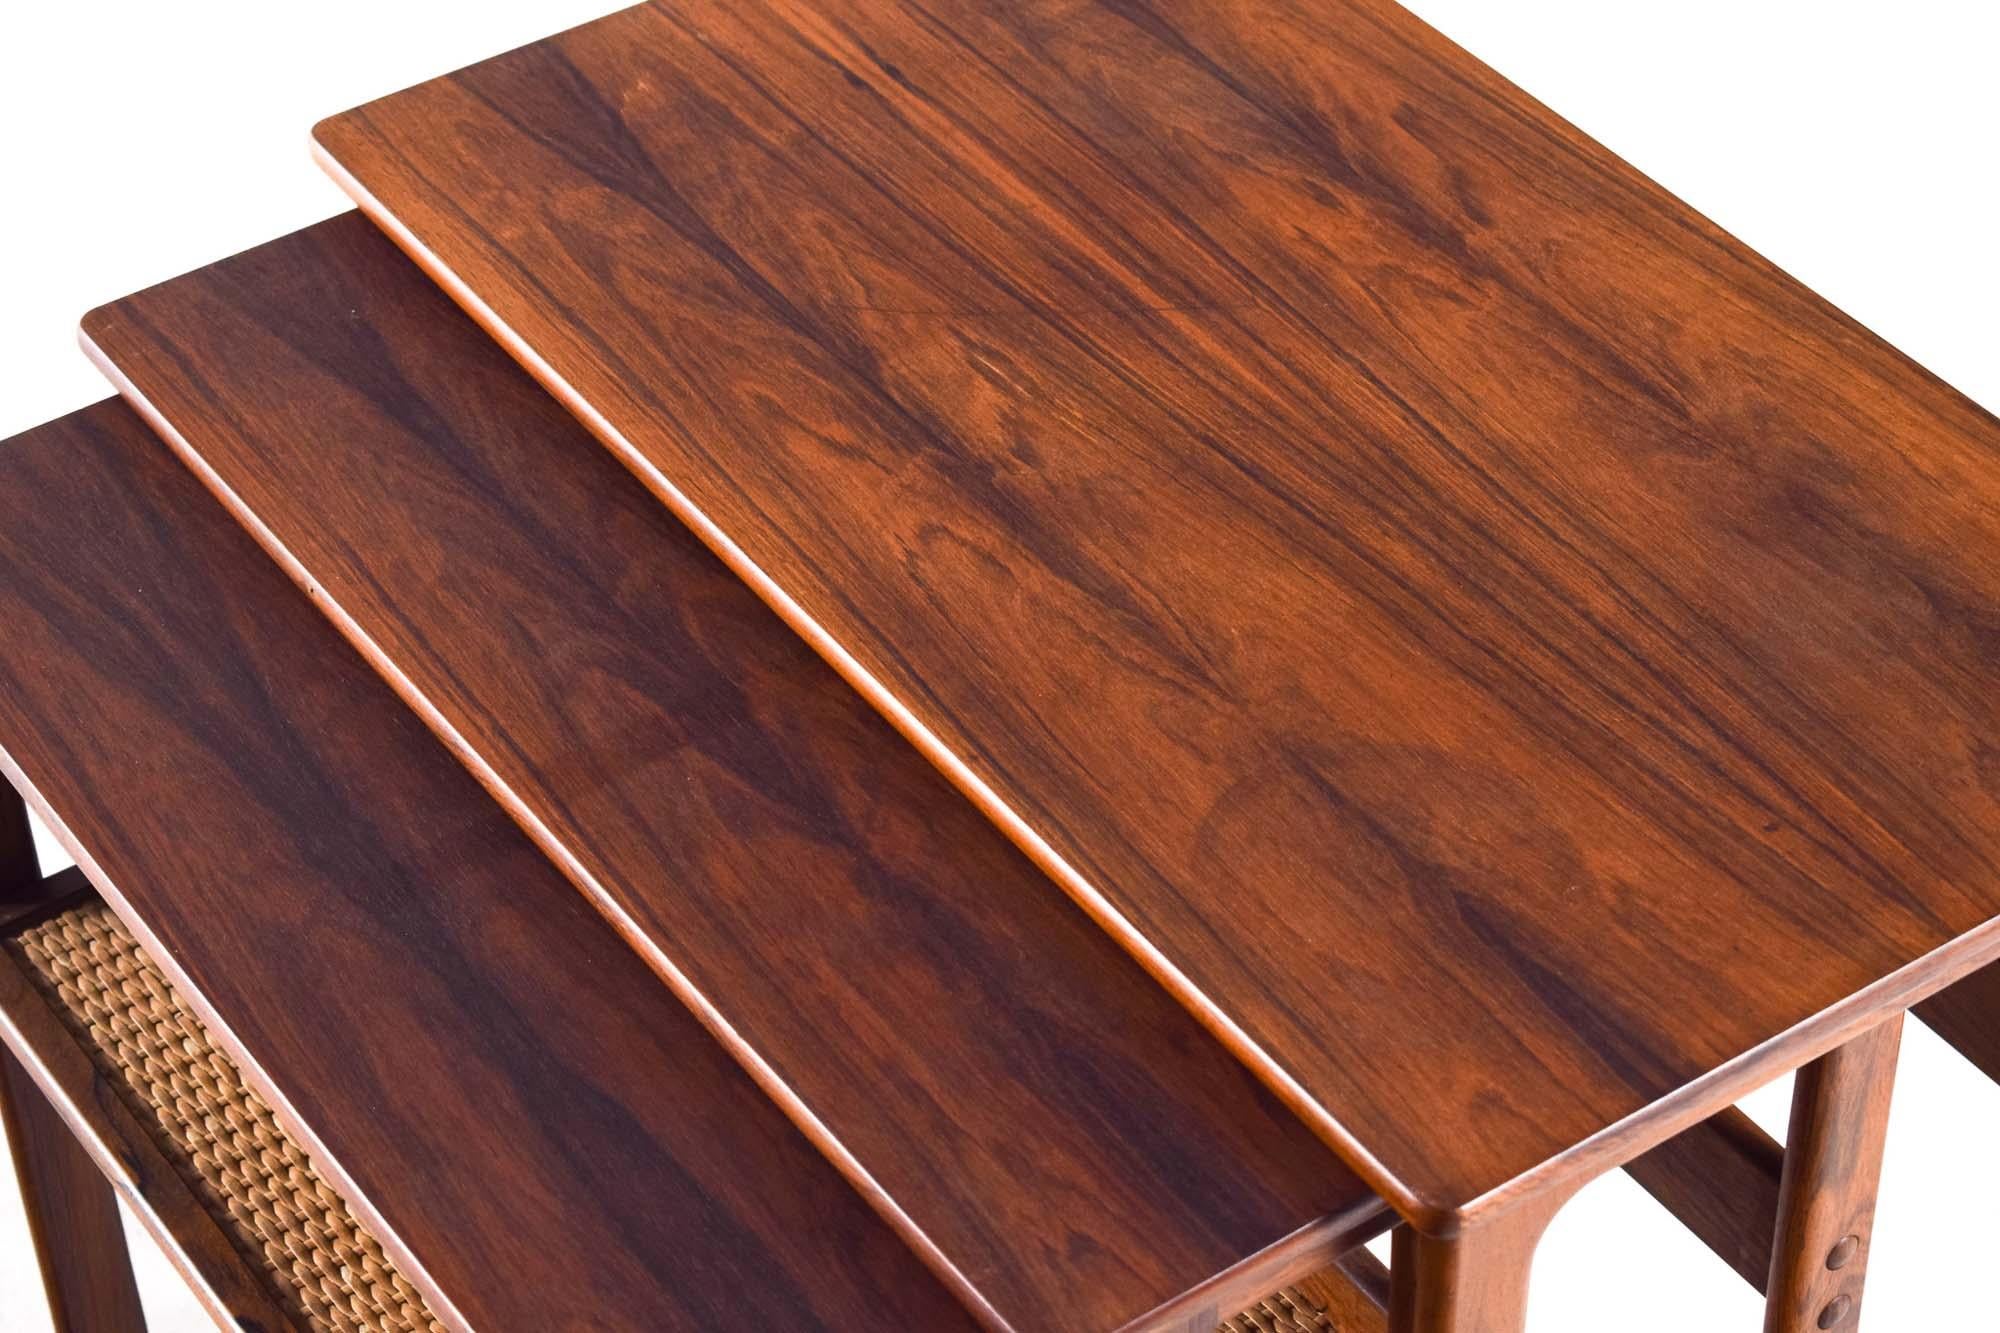 Rare set of three rosewood nesting tables by Danish designers Johannes Andersen & Illum Wikkelsø and produced by CFC Silkeborg. The quality is amazing, these have a gorgeous and very practical design. The rosewood has a lovely colour and wonderful